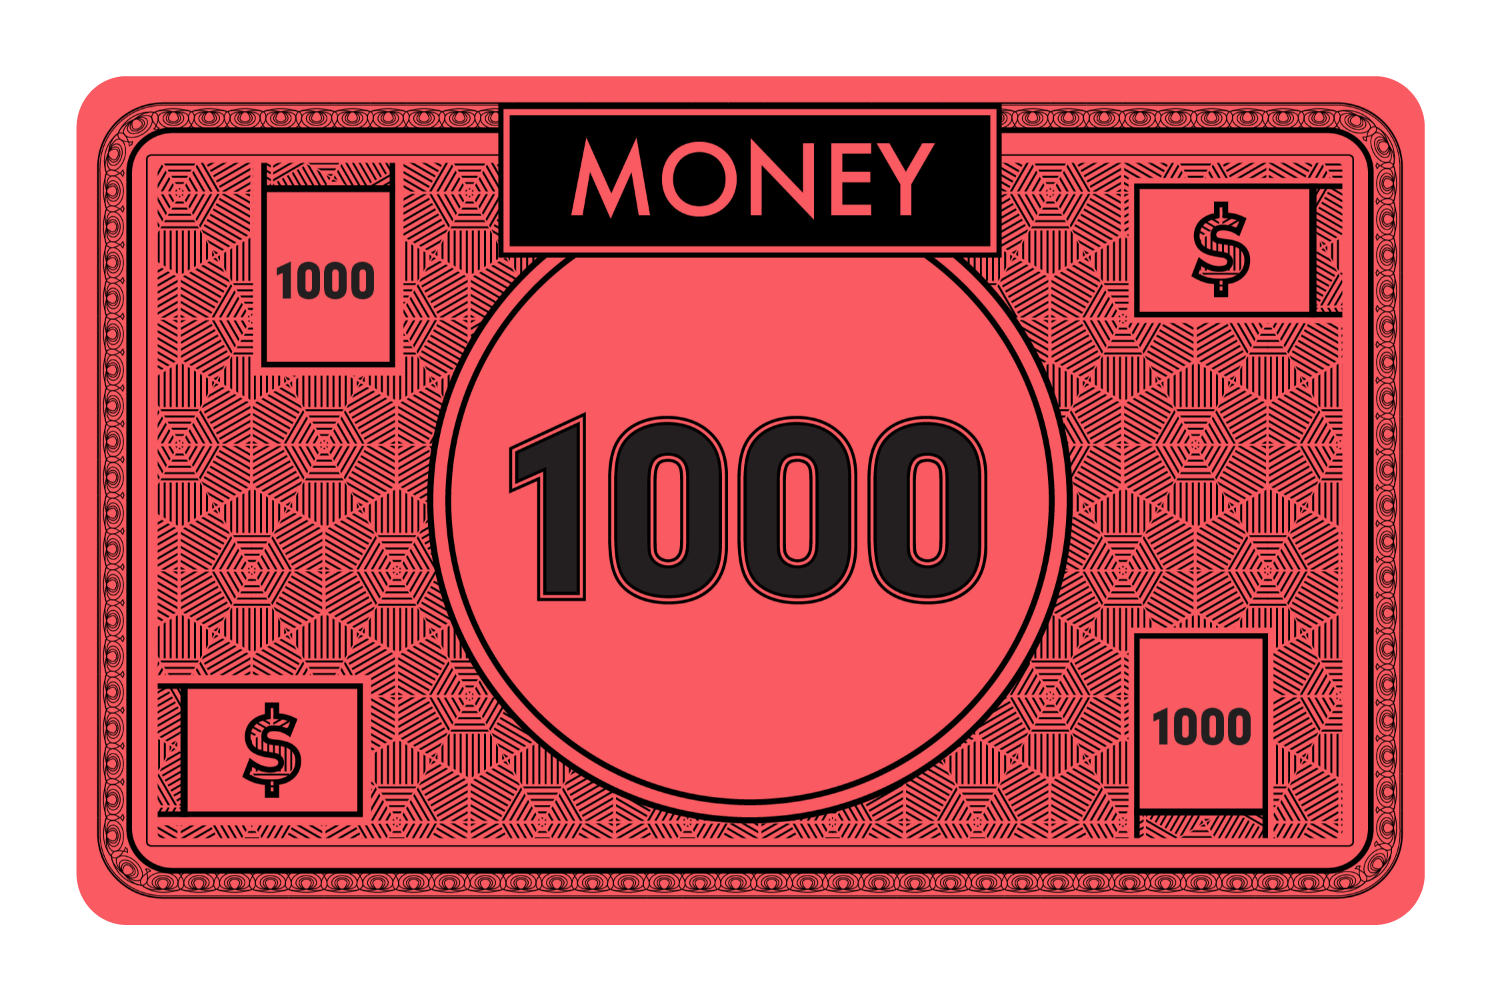 $1000 Note